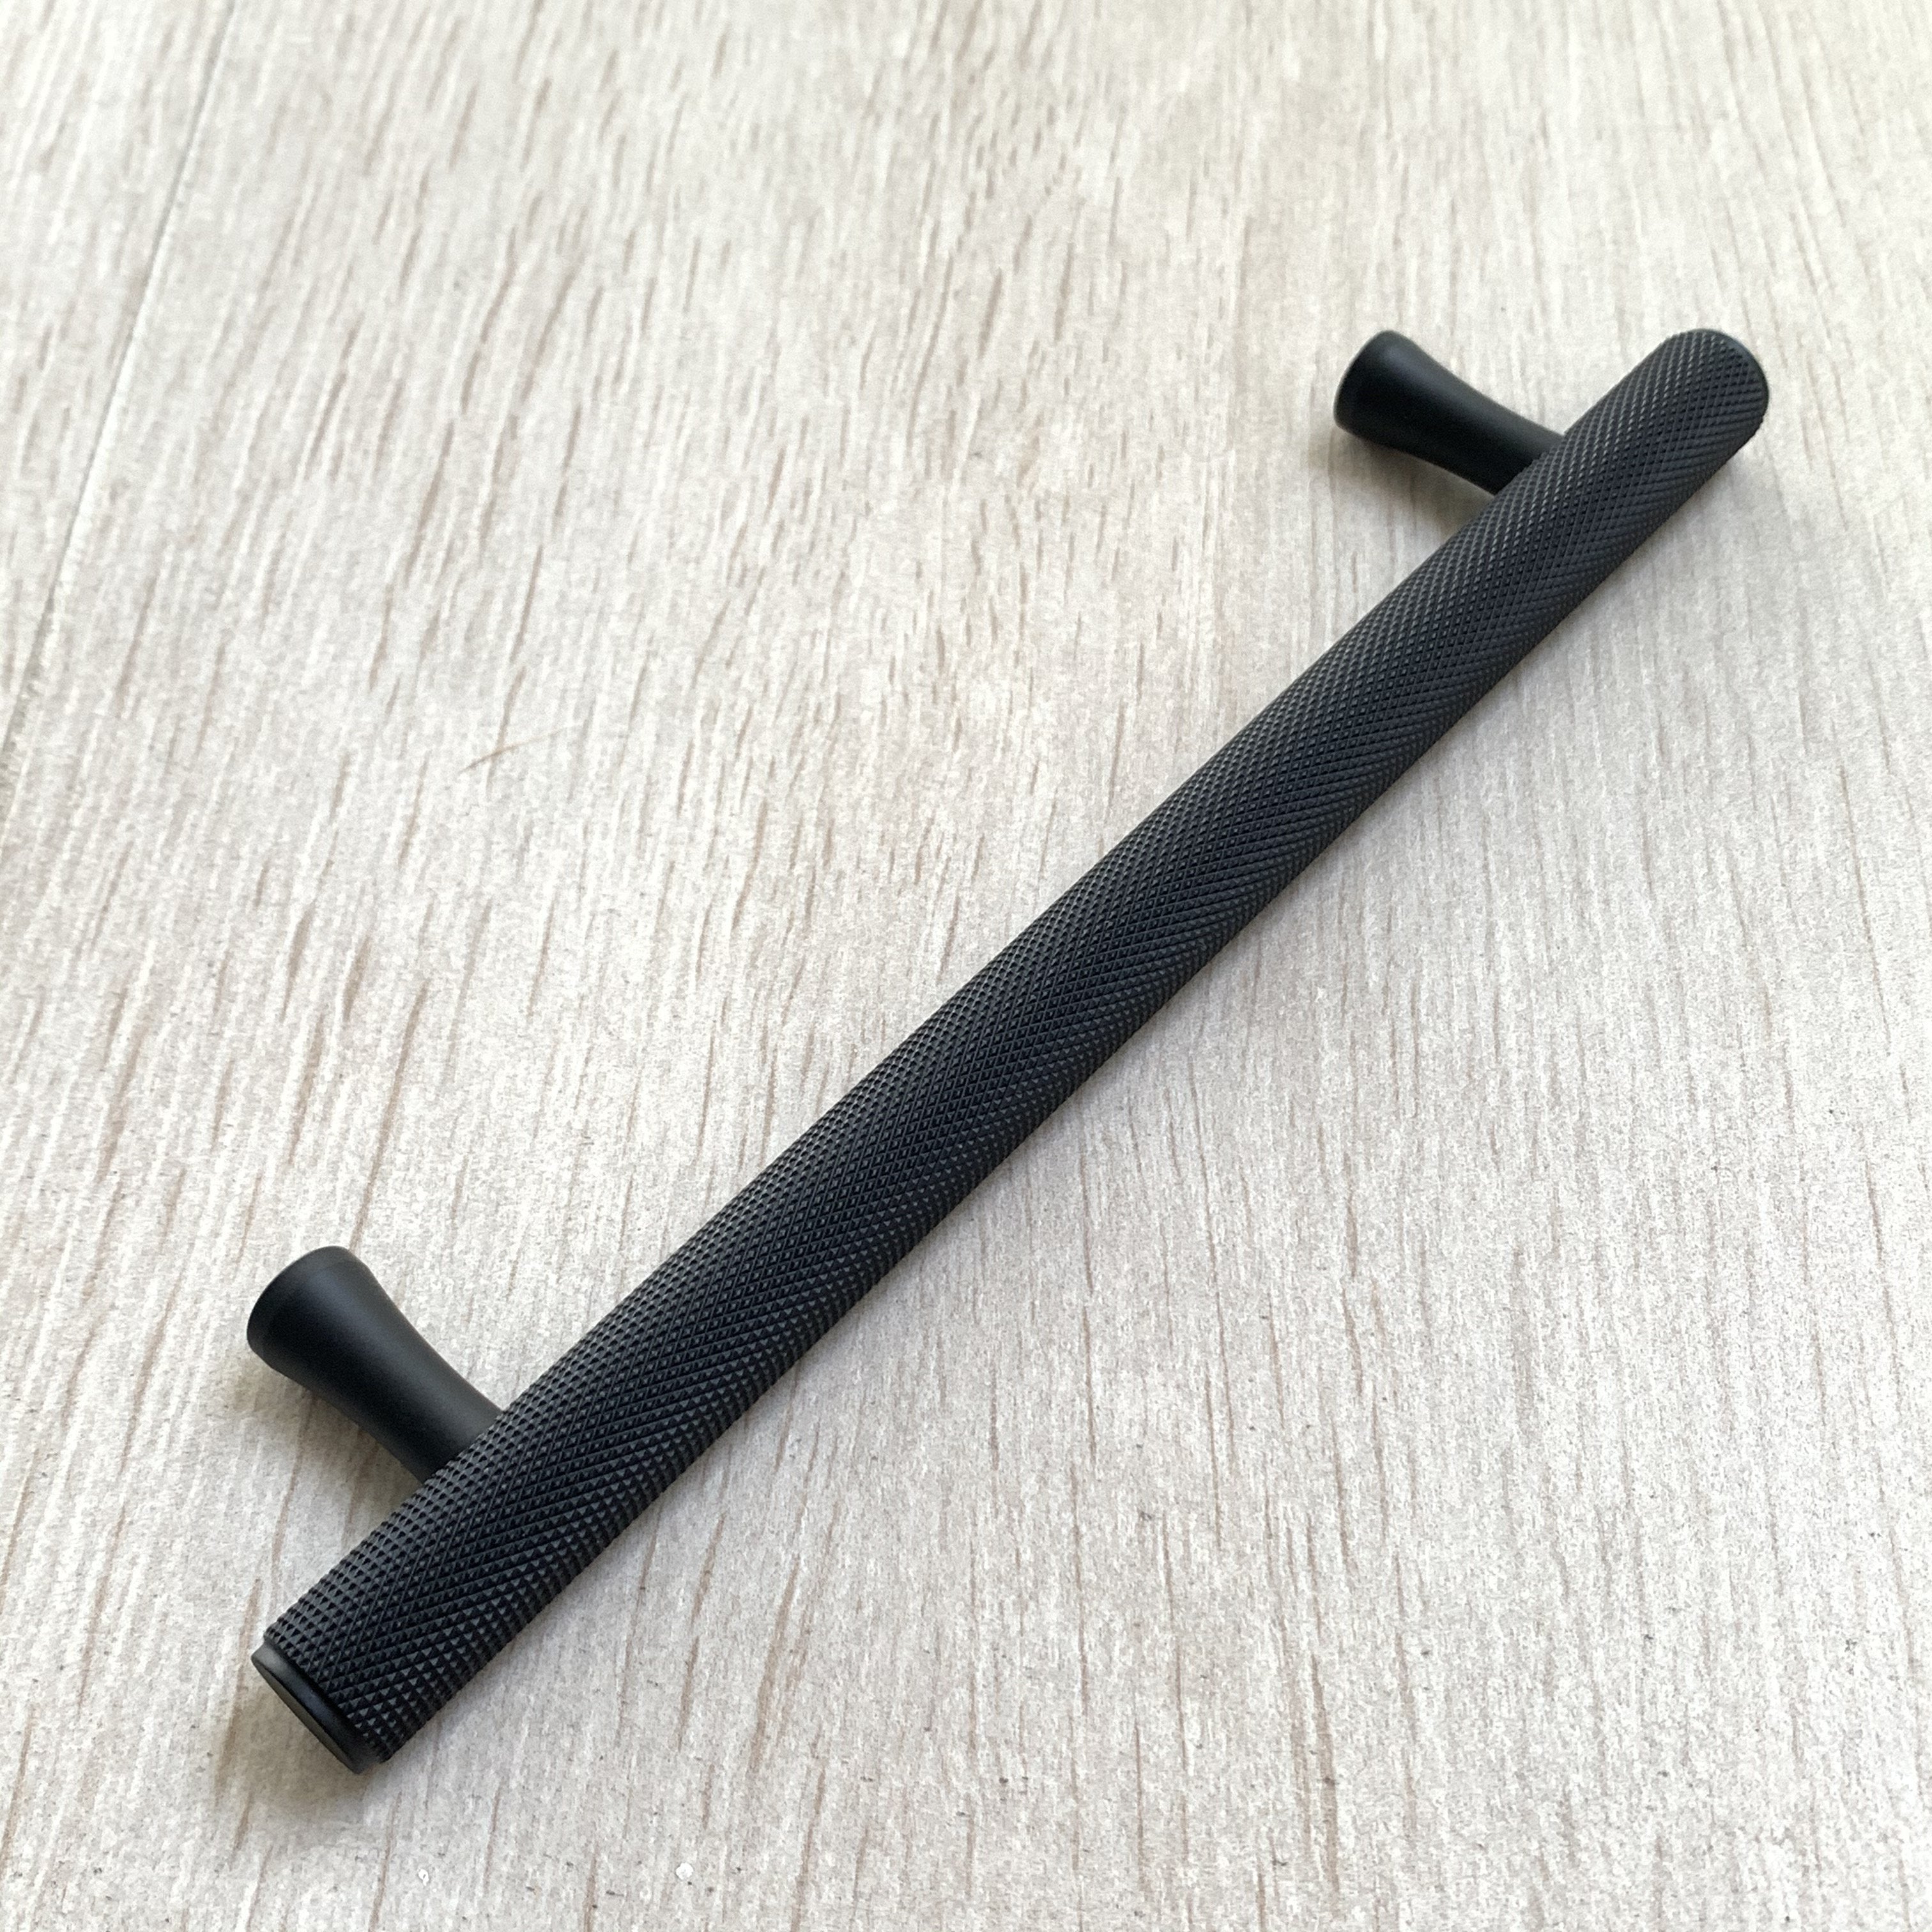 Knurled Matte Black Solid "Texture" Drawer Pulls and Knobs | Pulls